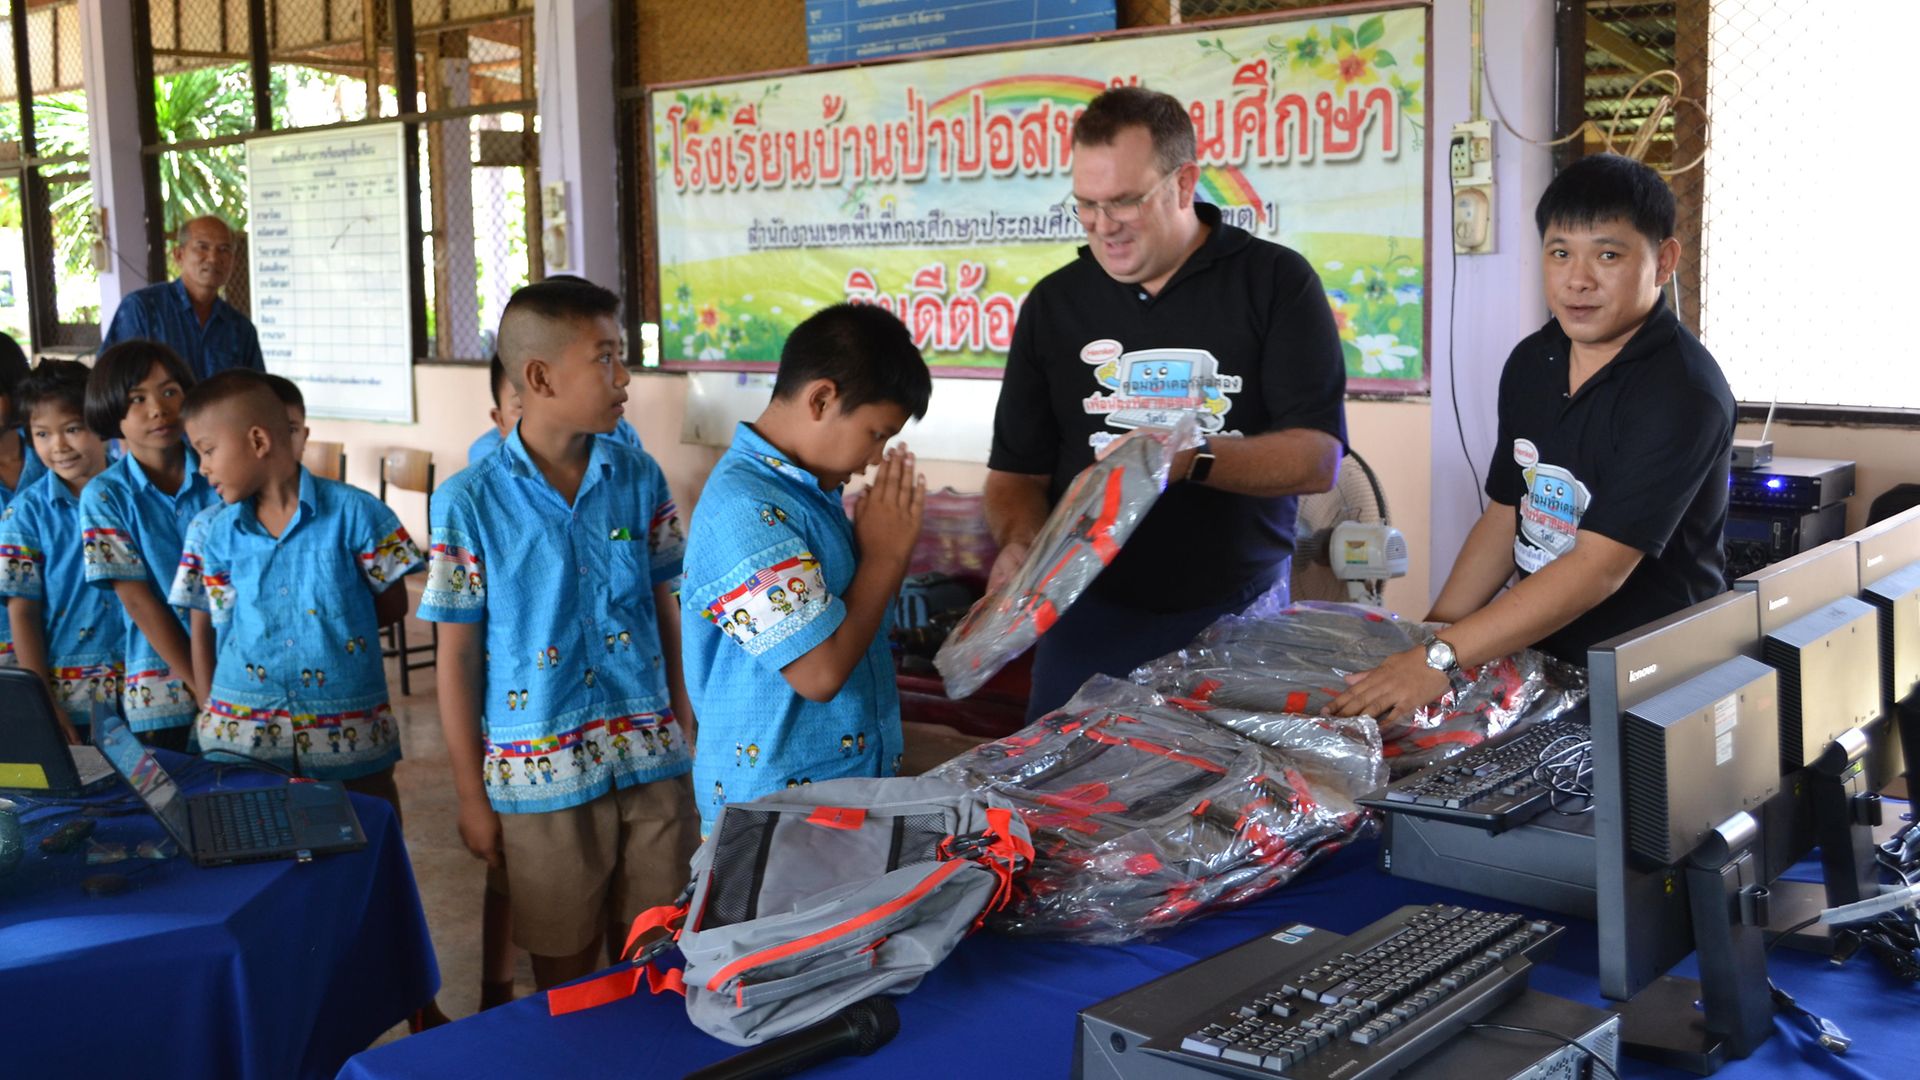 Ben van den Hende, Corporate Vice-President, Supply Chain, Beauty Care, Henkel Asia-Pacific, presenting the computer sets to the children